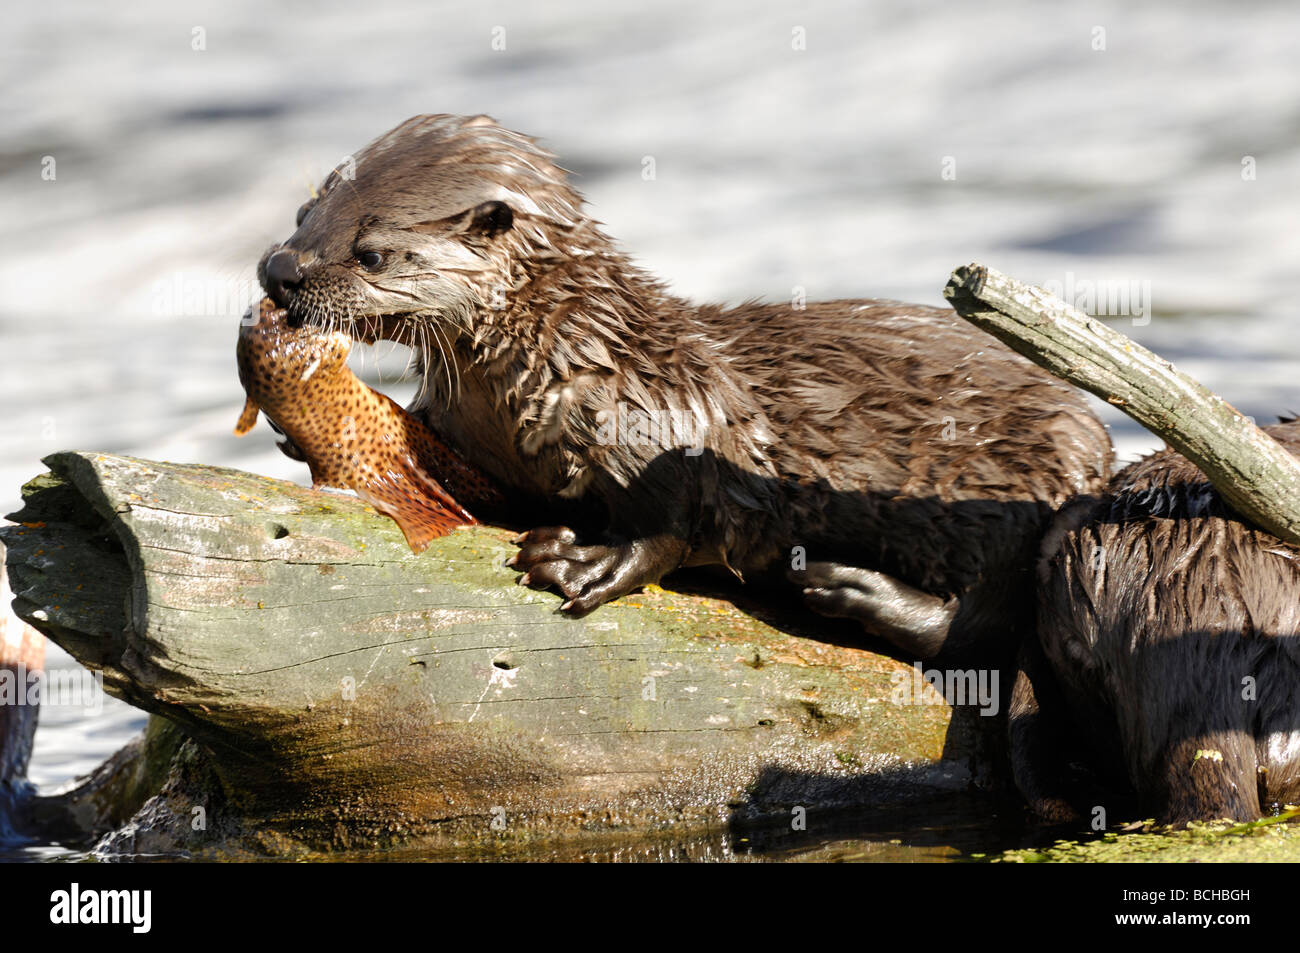 Stock photo of a river otter pup sitting on a log eating a trout, Yellowstone National Park, Montana, 2009. Stock Photo